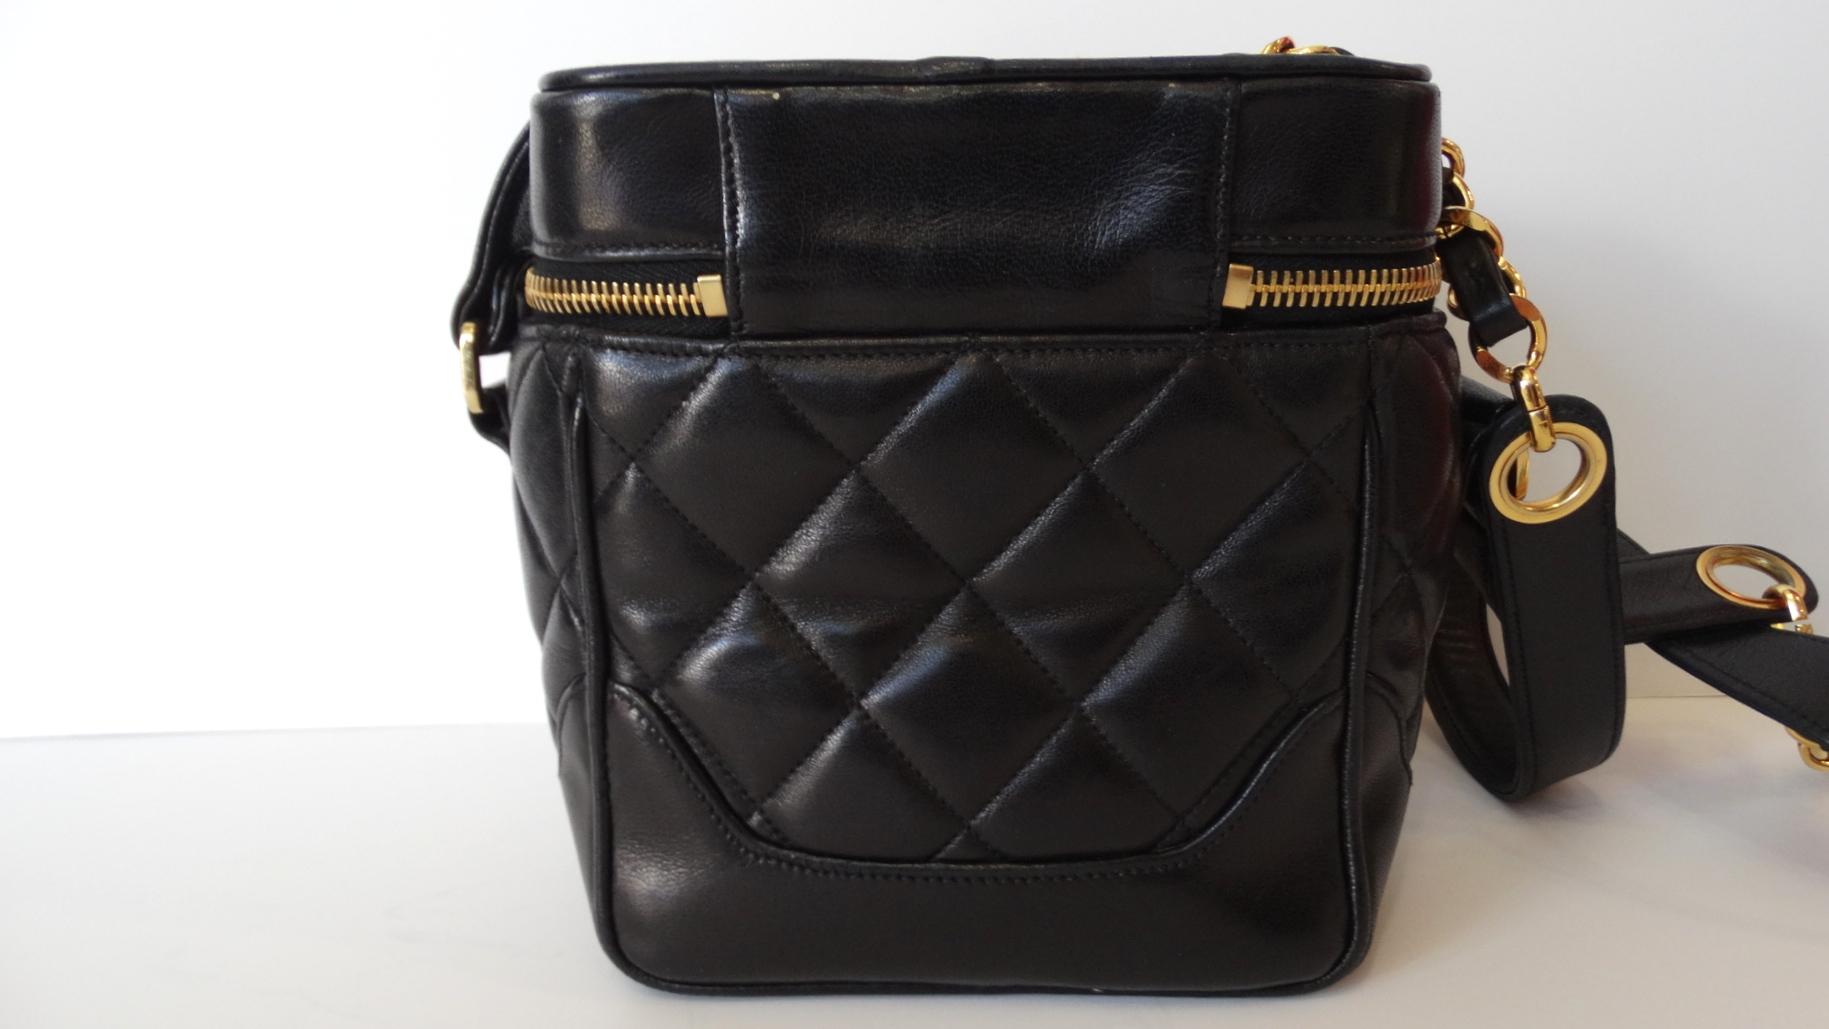 Rock a piece of fashion history with our adorable Karl Lagerfeld Era 1990s Chanel box bag! Made of a soft black lambskin leather stitched with Chanel's signature quilting. Iconic gold and black chain strap woven with leather to match. Oversized 